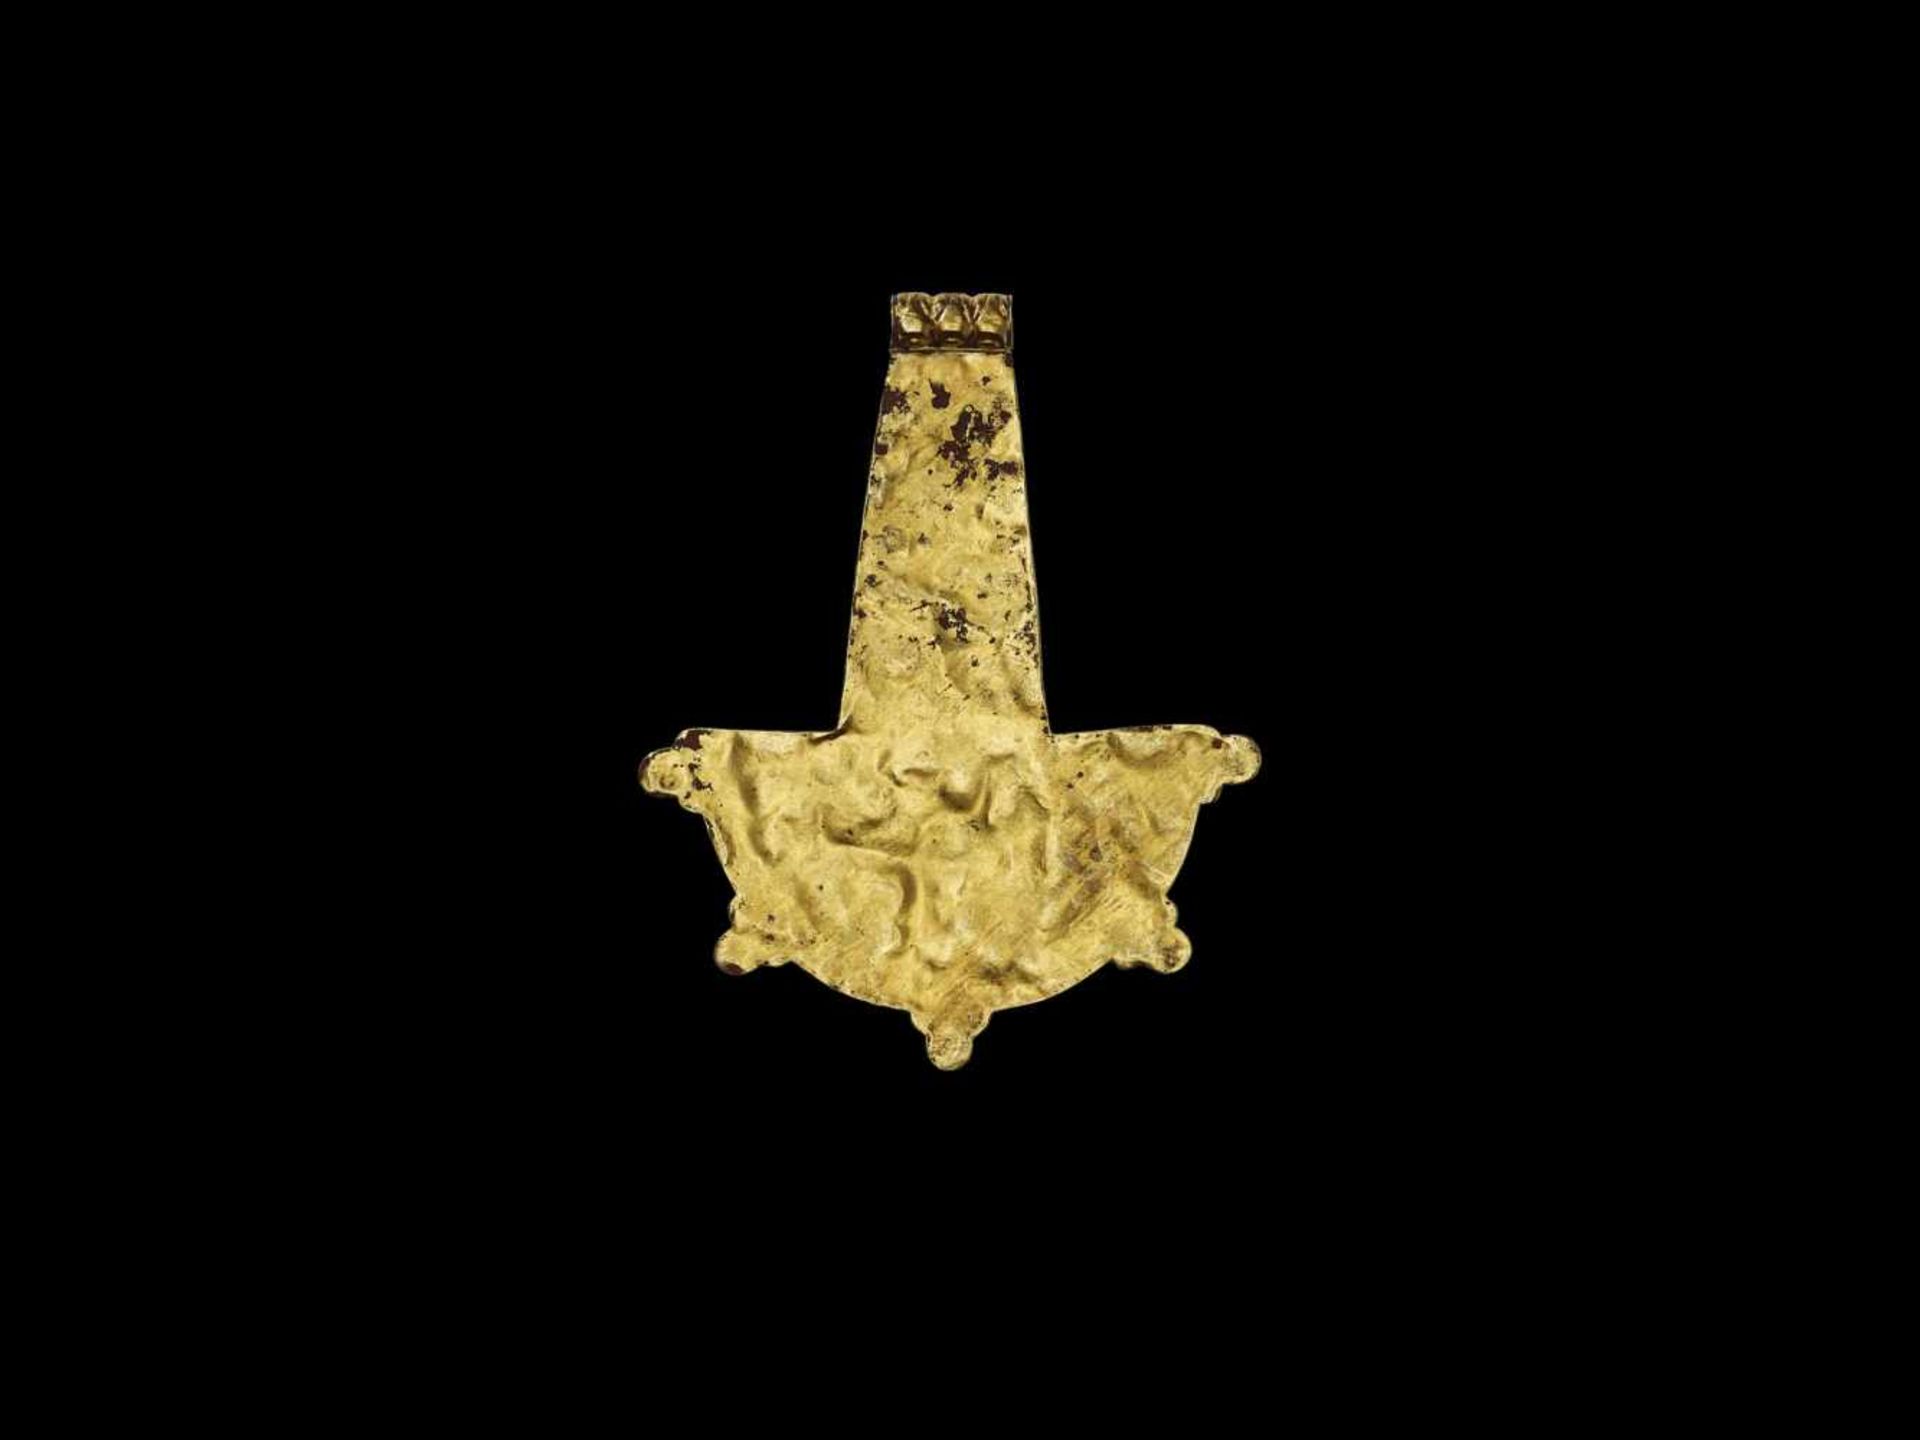 A CHAM GOLD PENDANT WITH HEAD OF KALA Central or southern Cham kingdom, Tra Kieu Style, 11th – - Image 3 of 5